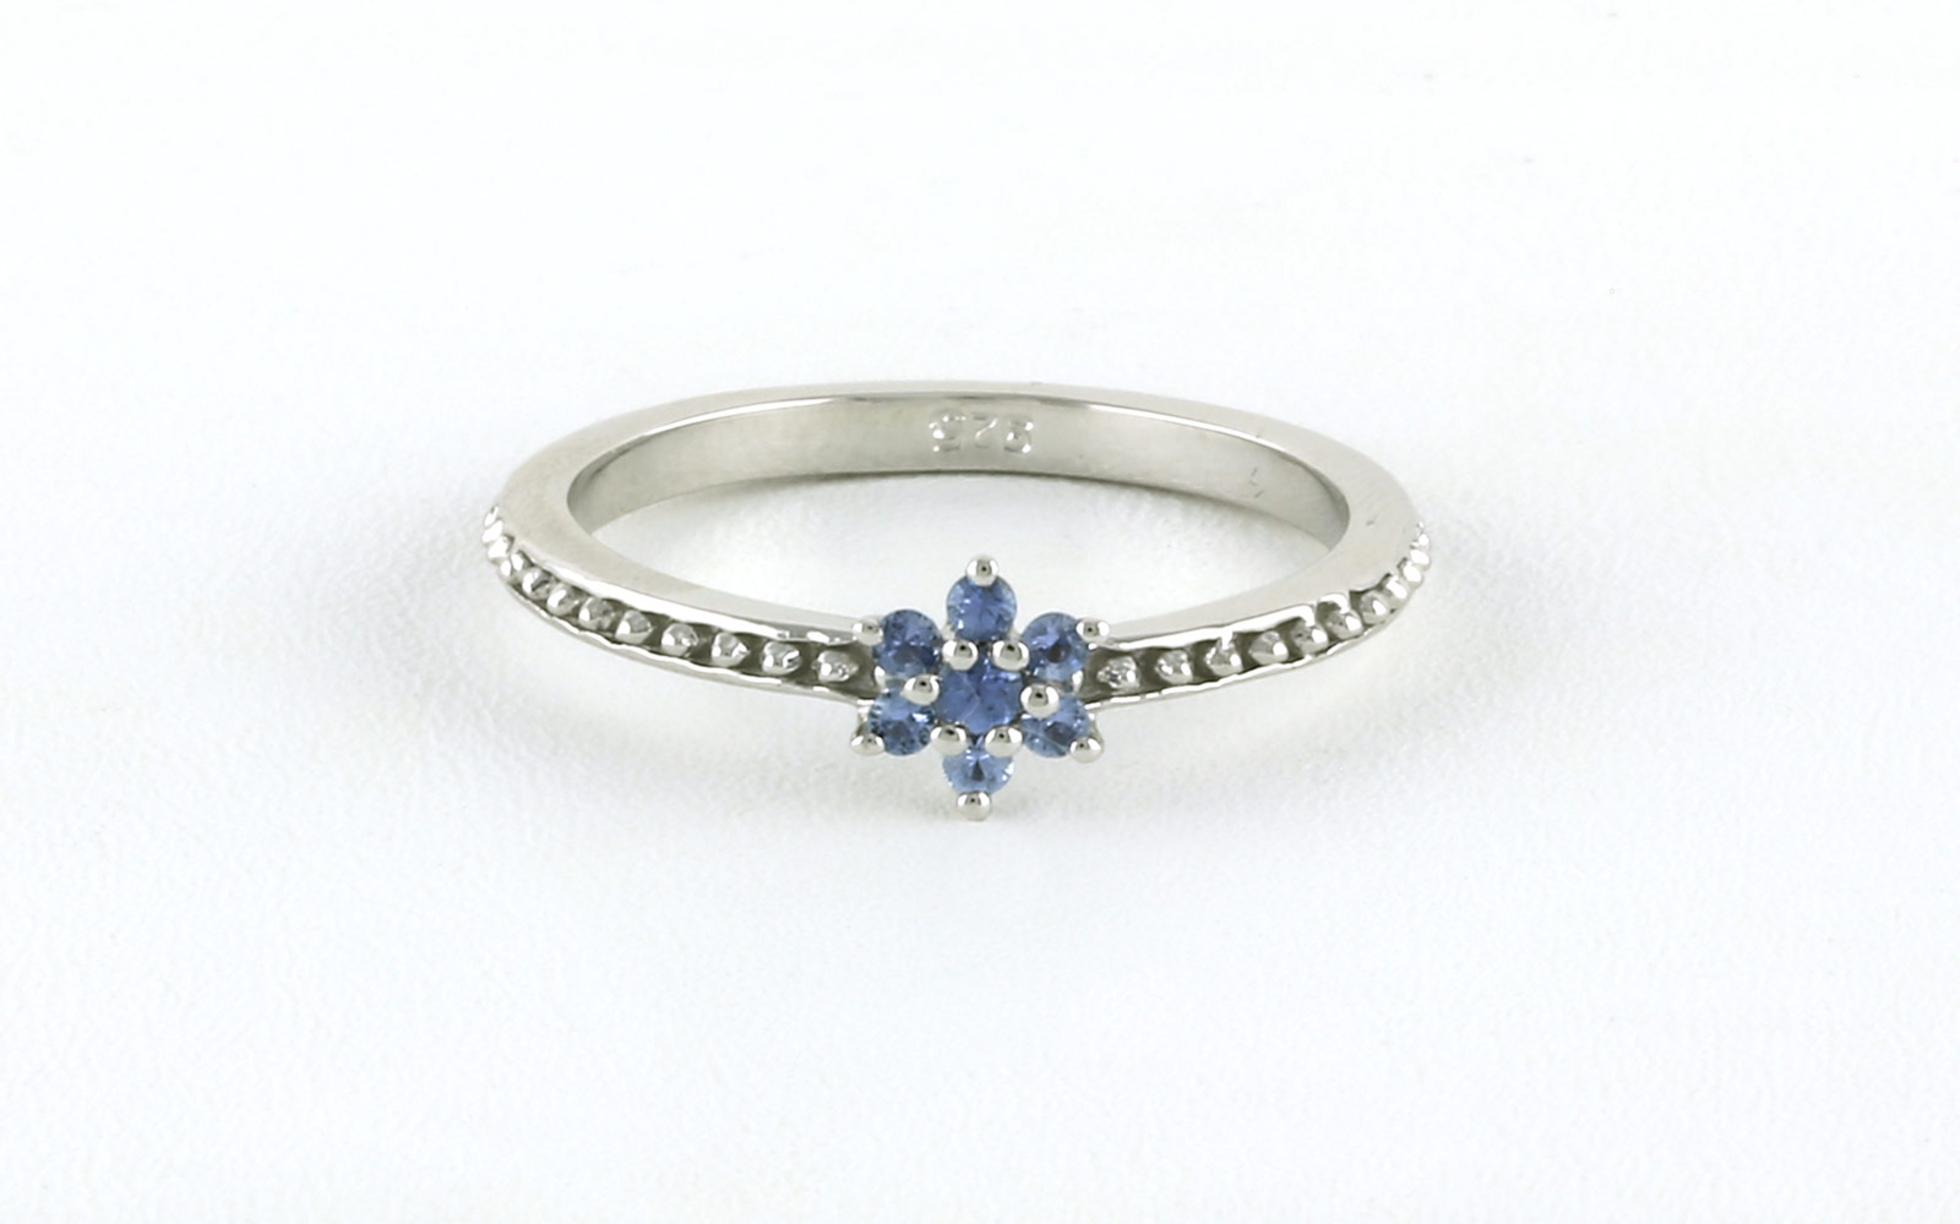 7-Stone Flower Cluster Montana Yogo Sapphire Ring with Beaded Details in Sterling Silver (0.14cts TWT)